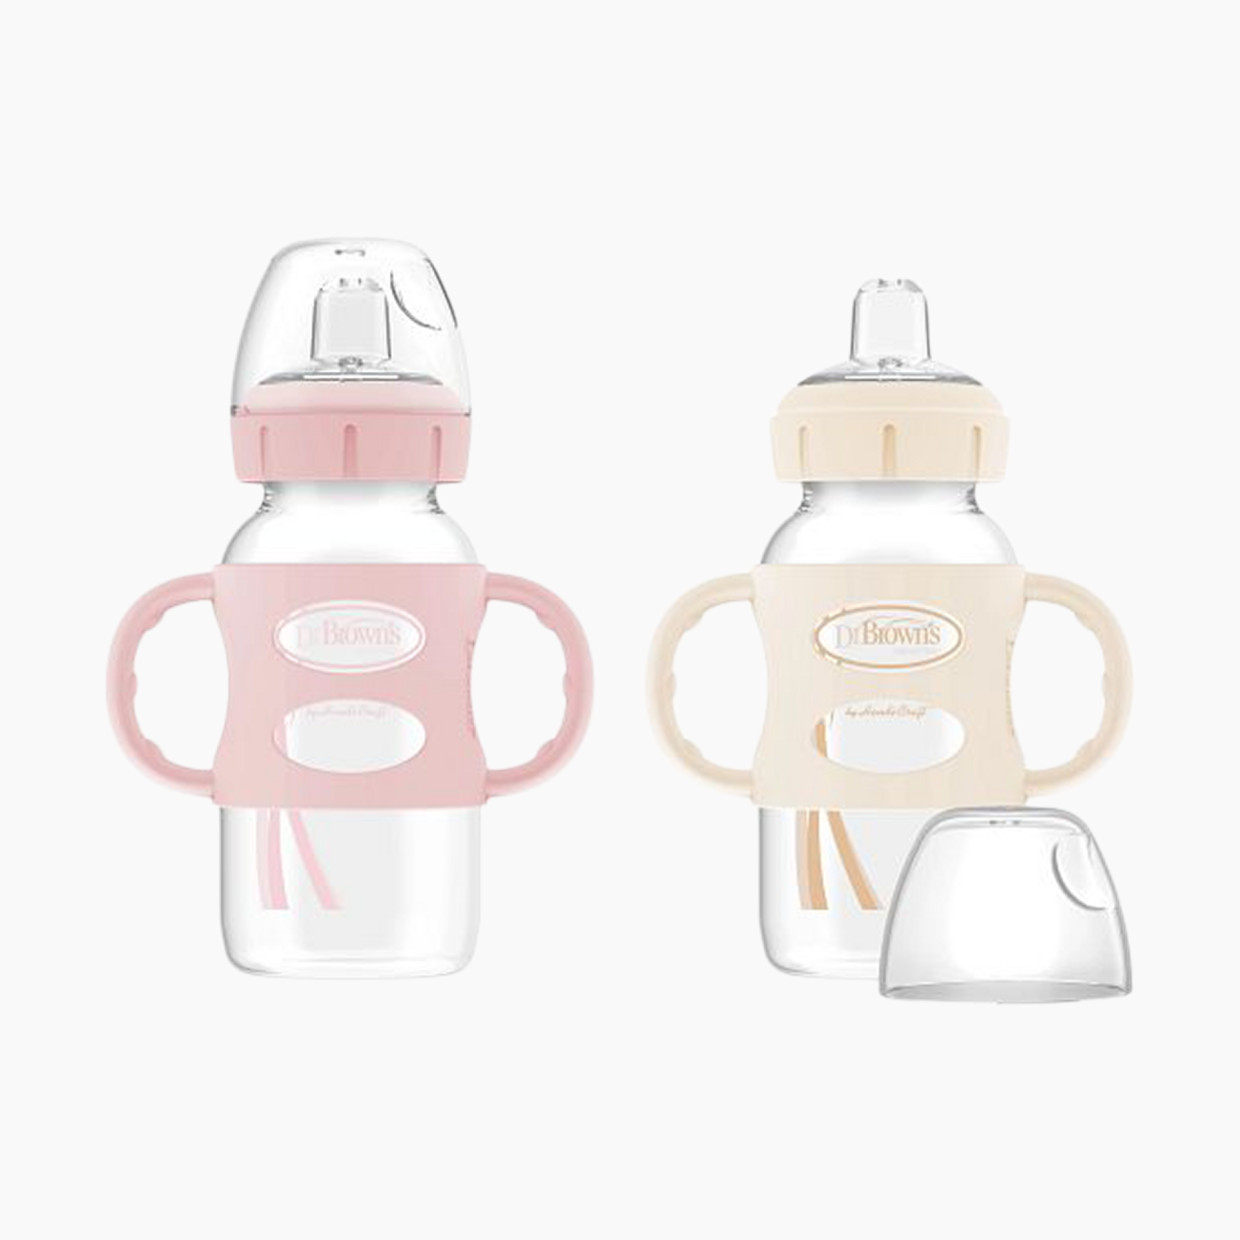 Dr. Brown's Wide-Neck SIPPY SPOUT Bottles w/ Silicone Handles (2-Pack) - Lt Pink & Ecru, 9 Oz, 2.